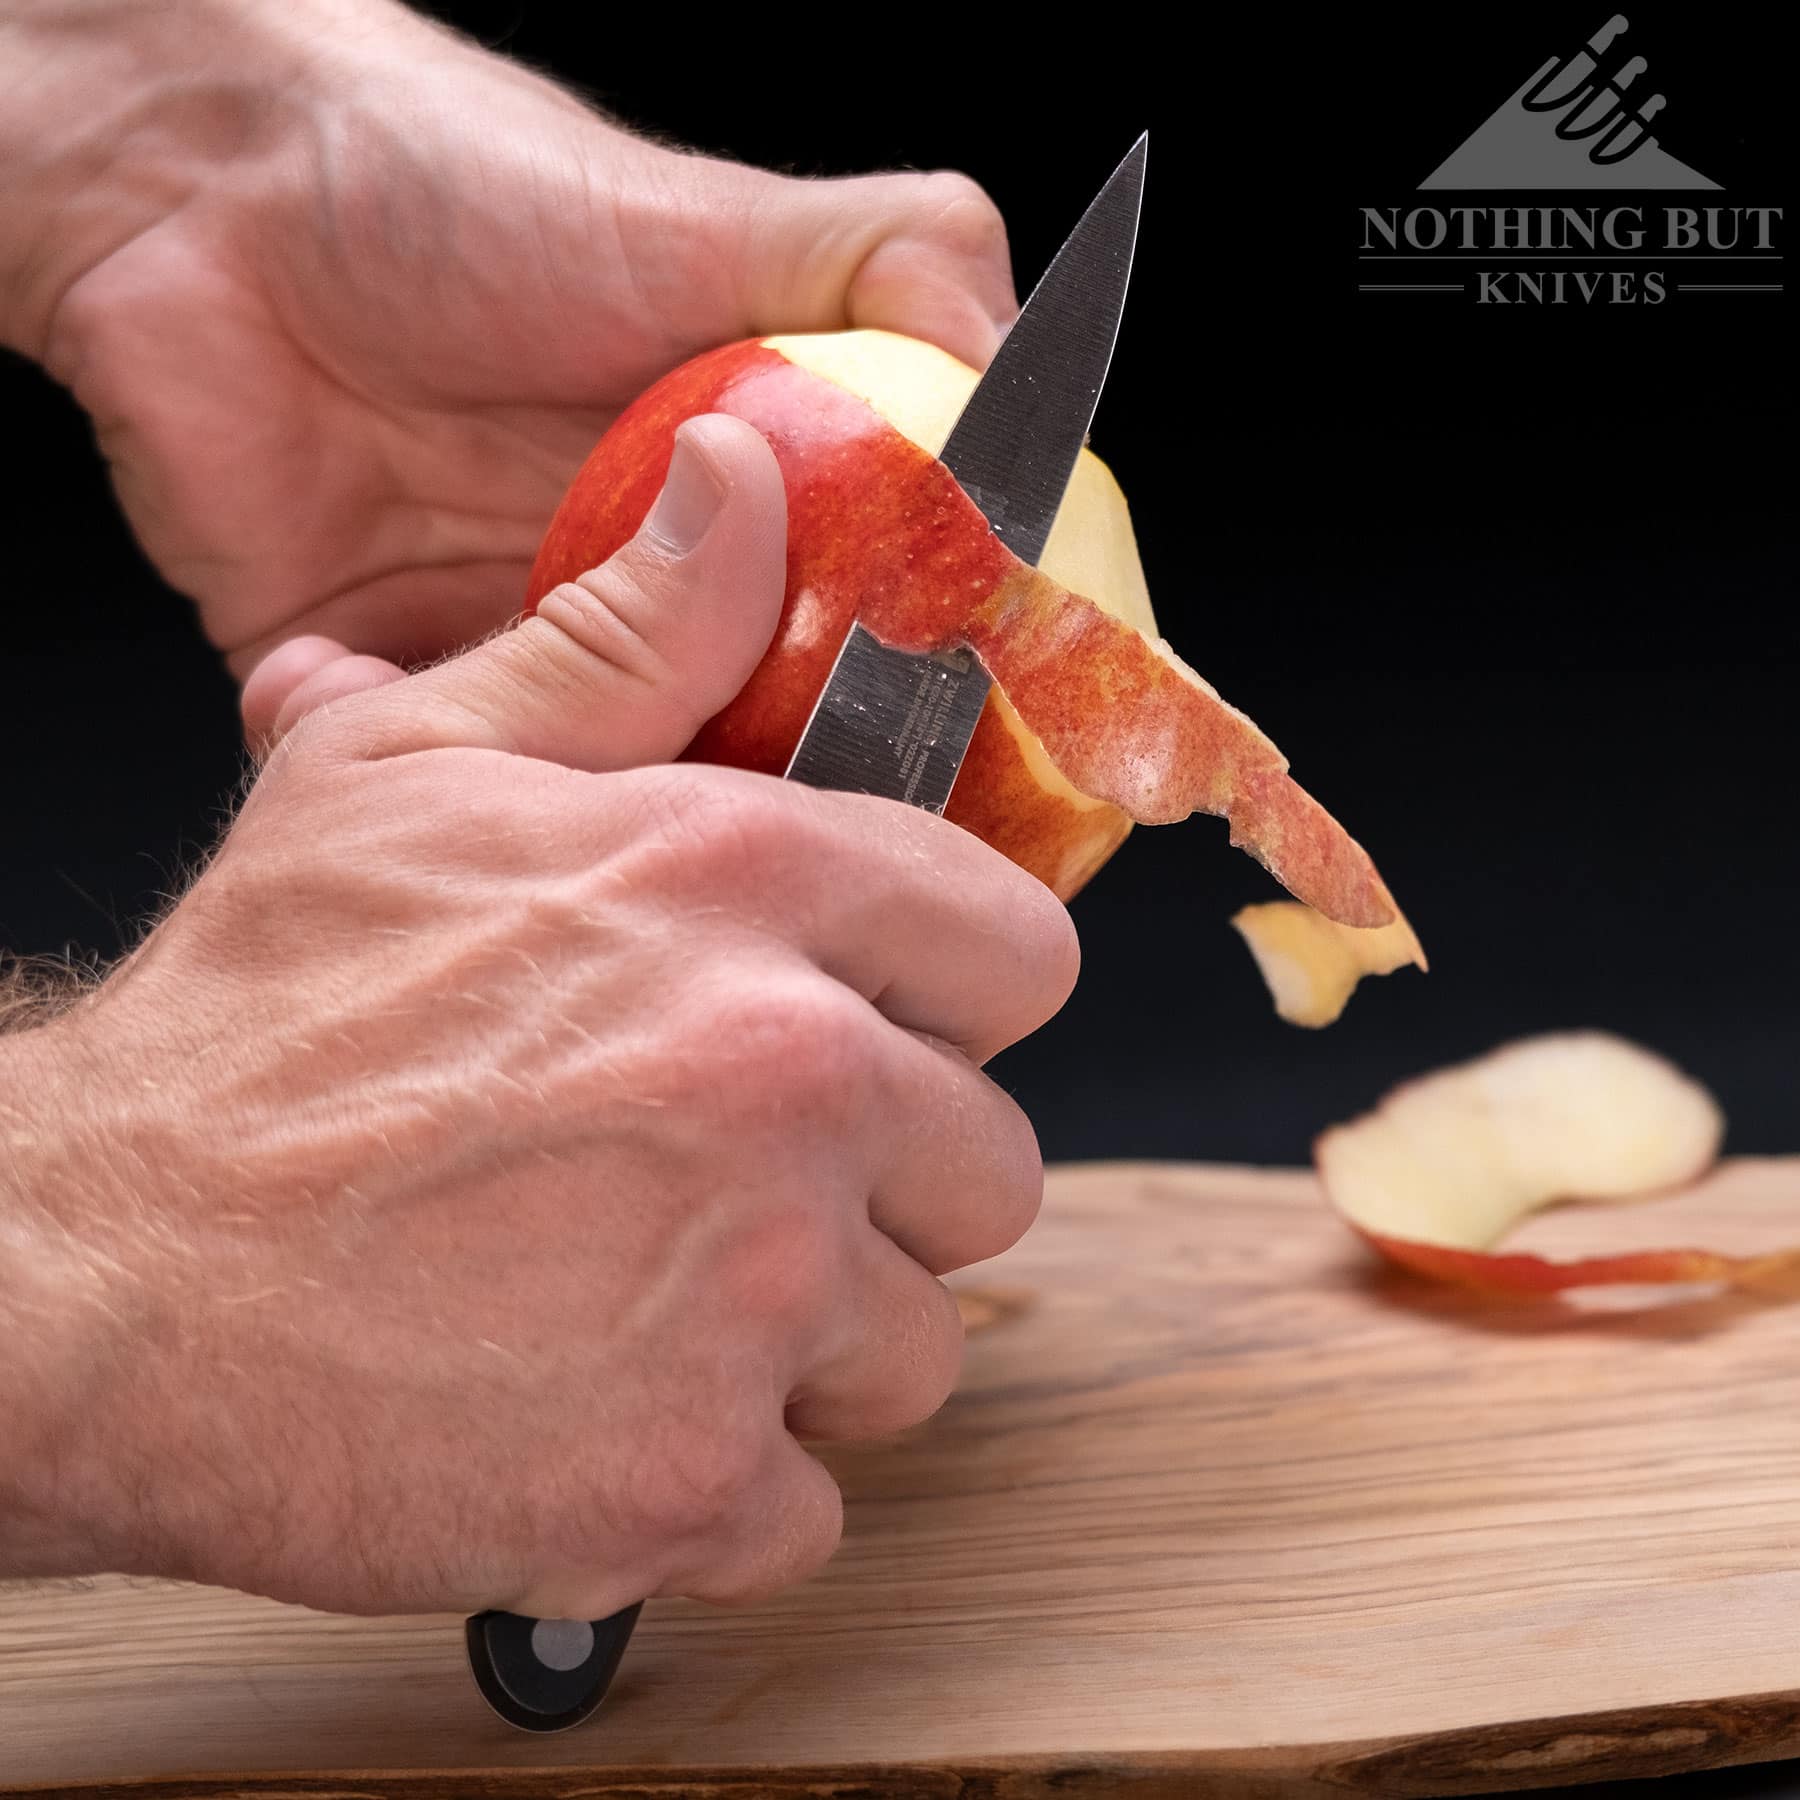 Peeling a red apple with the Zwilling Professional S paring knife.